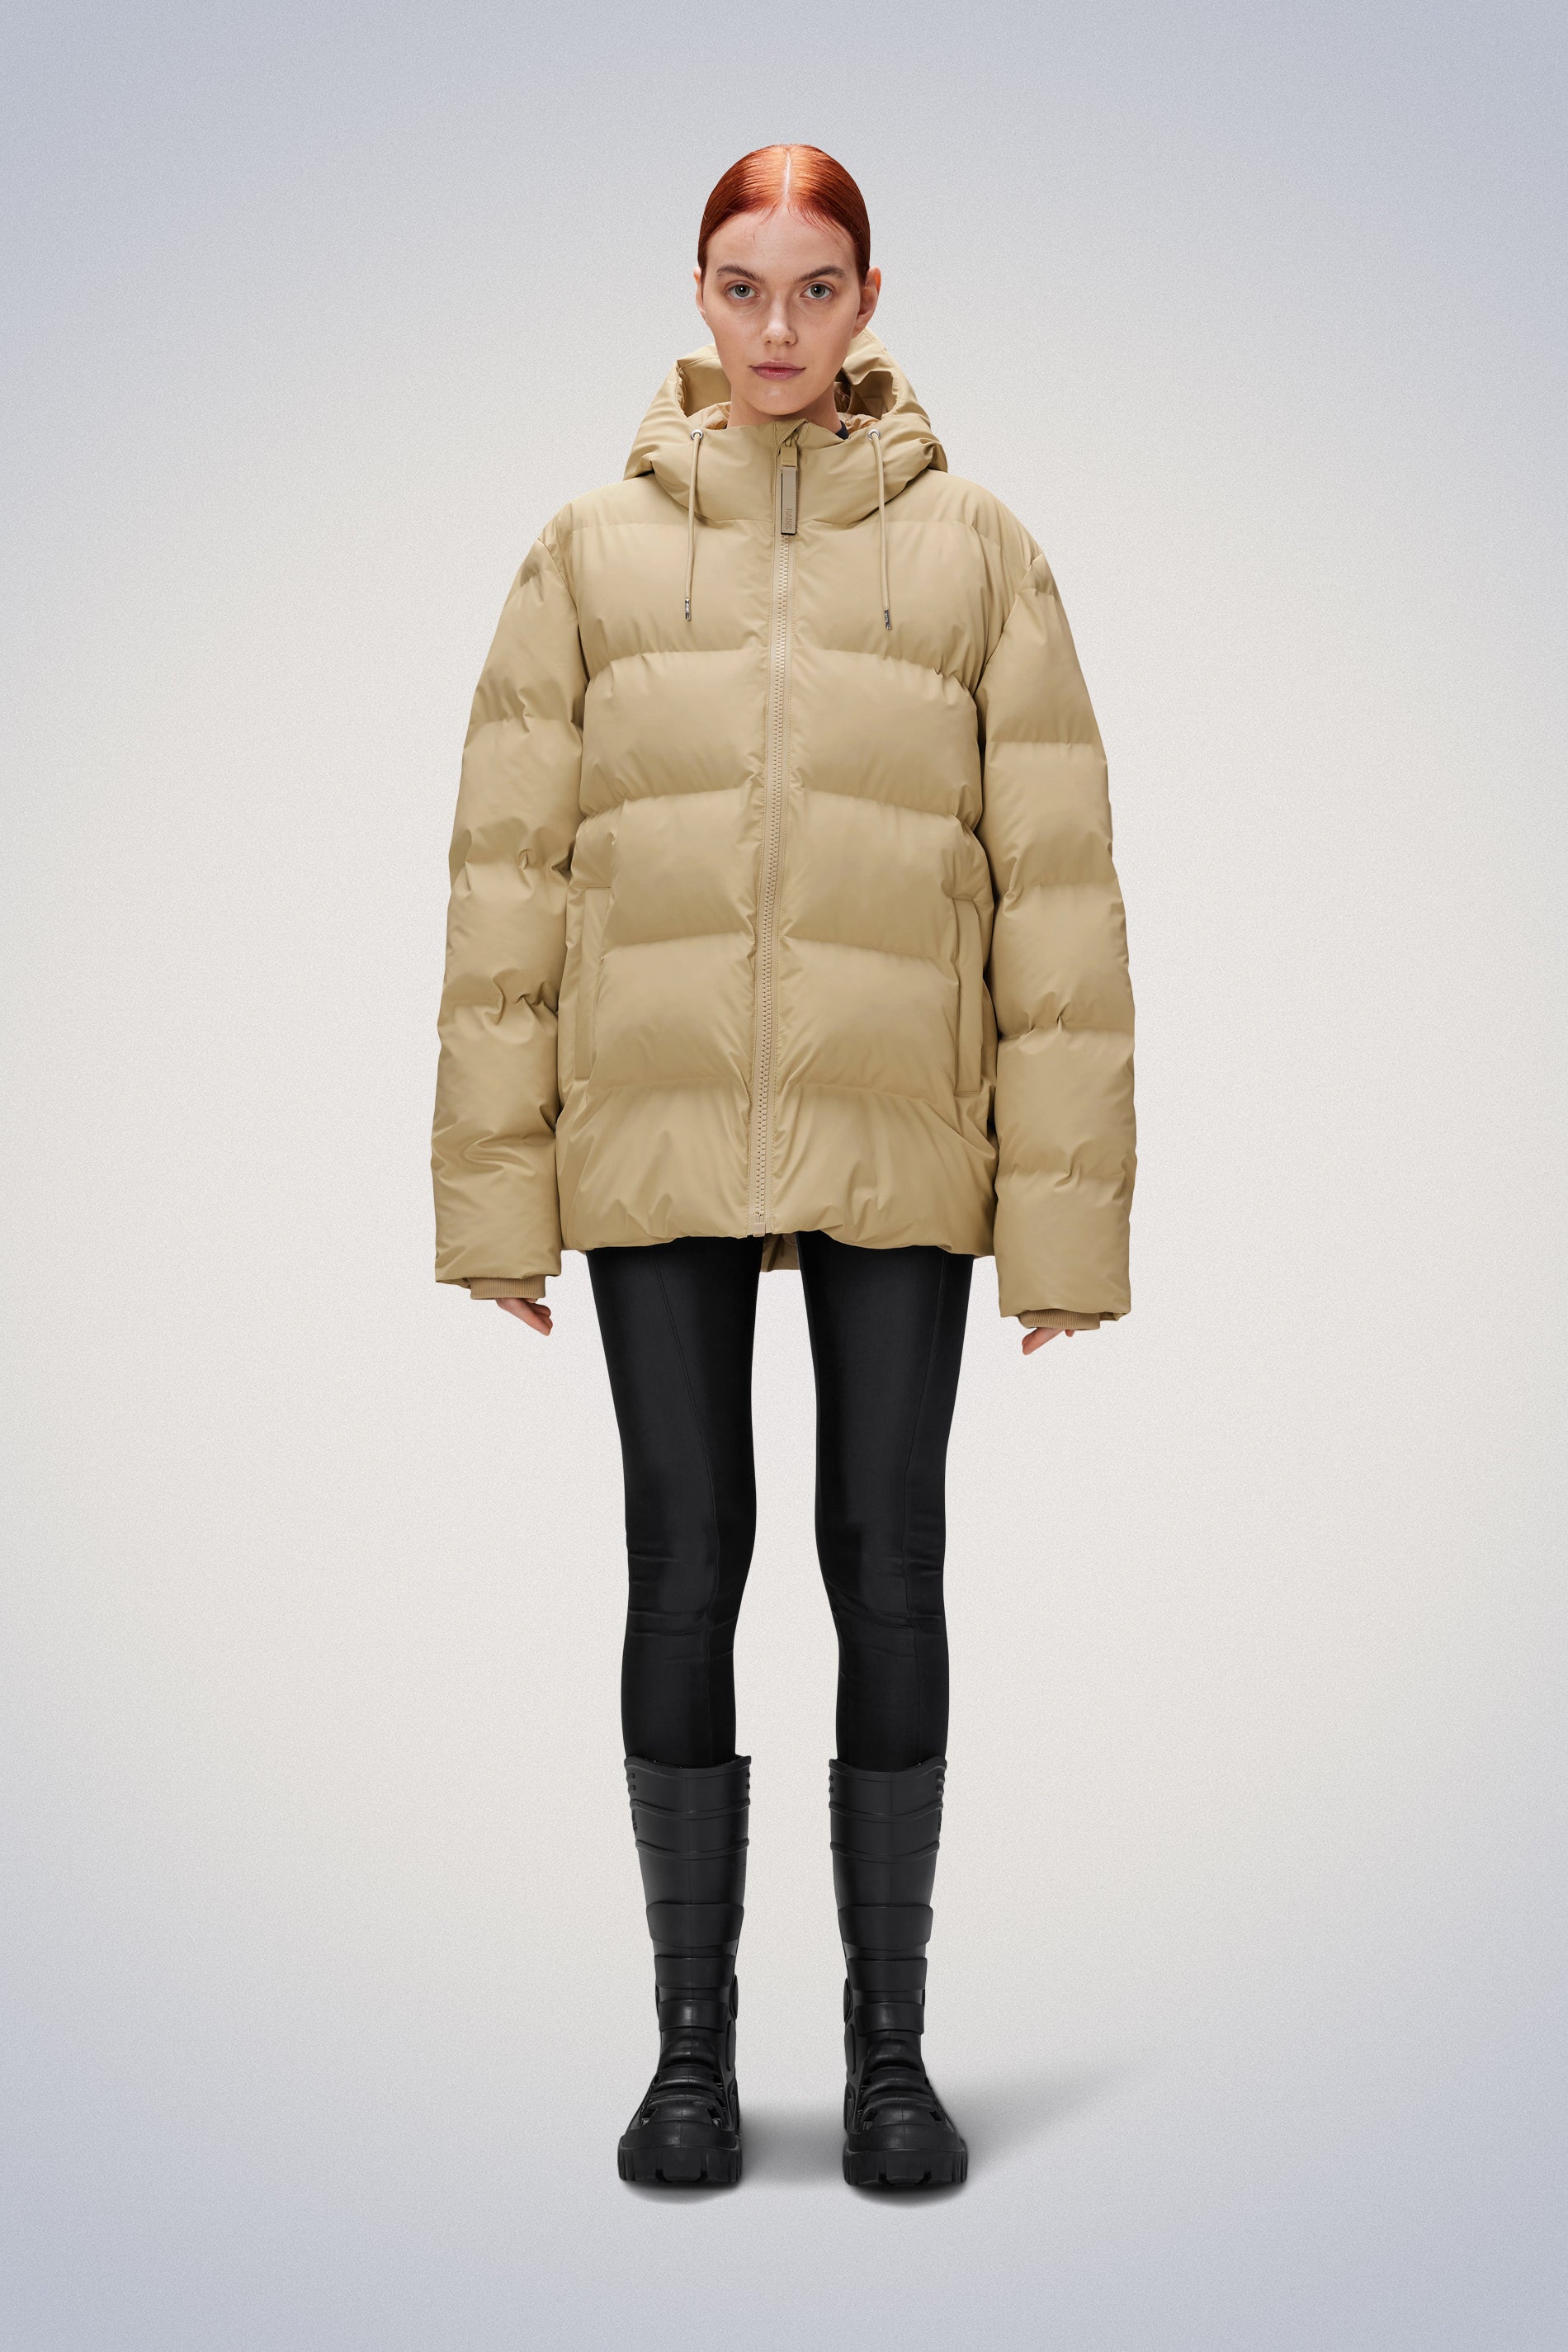 Rains® Alta Puffer Jacket in Navy for $430